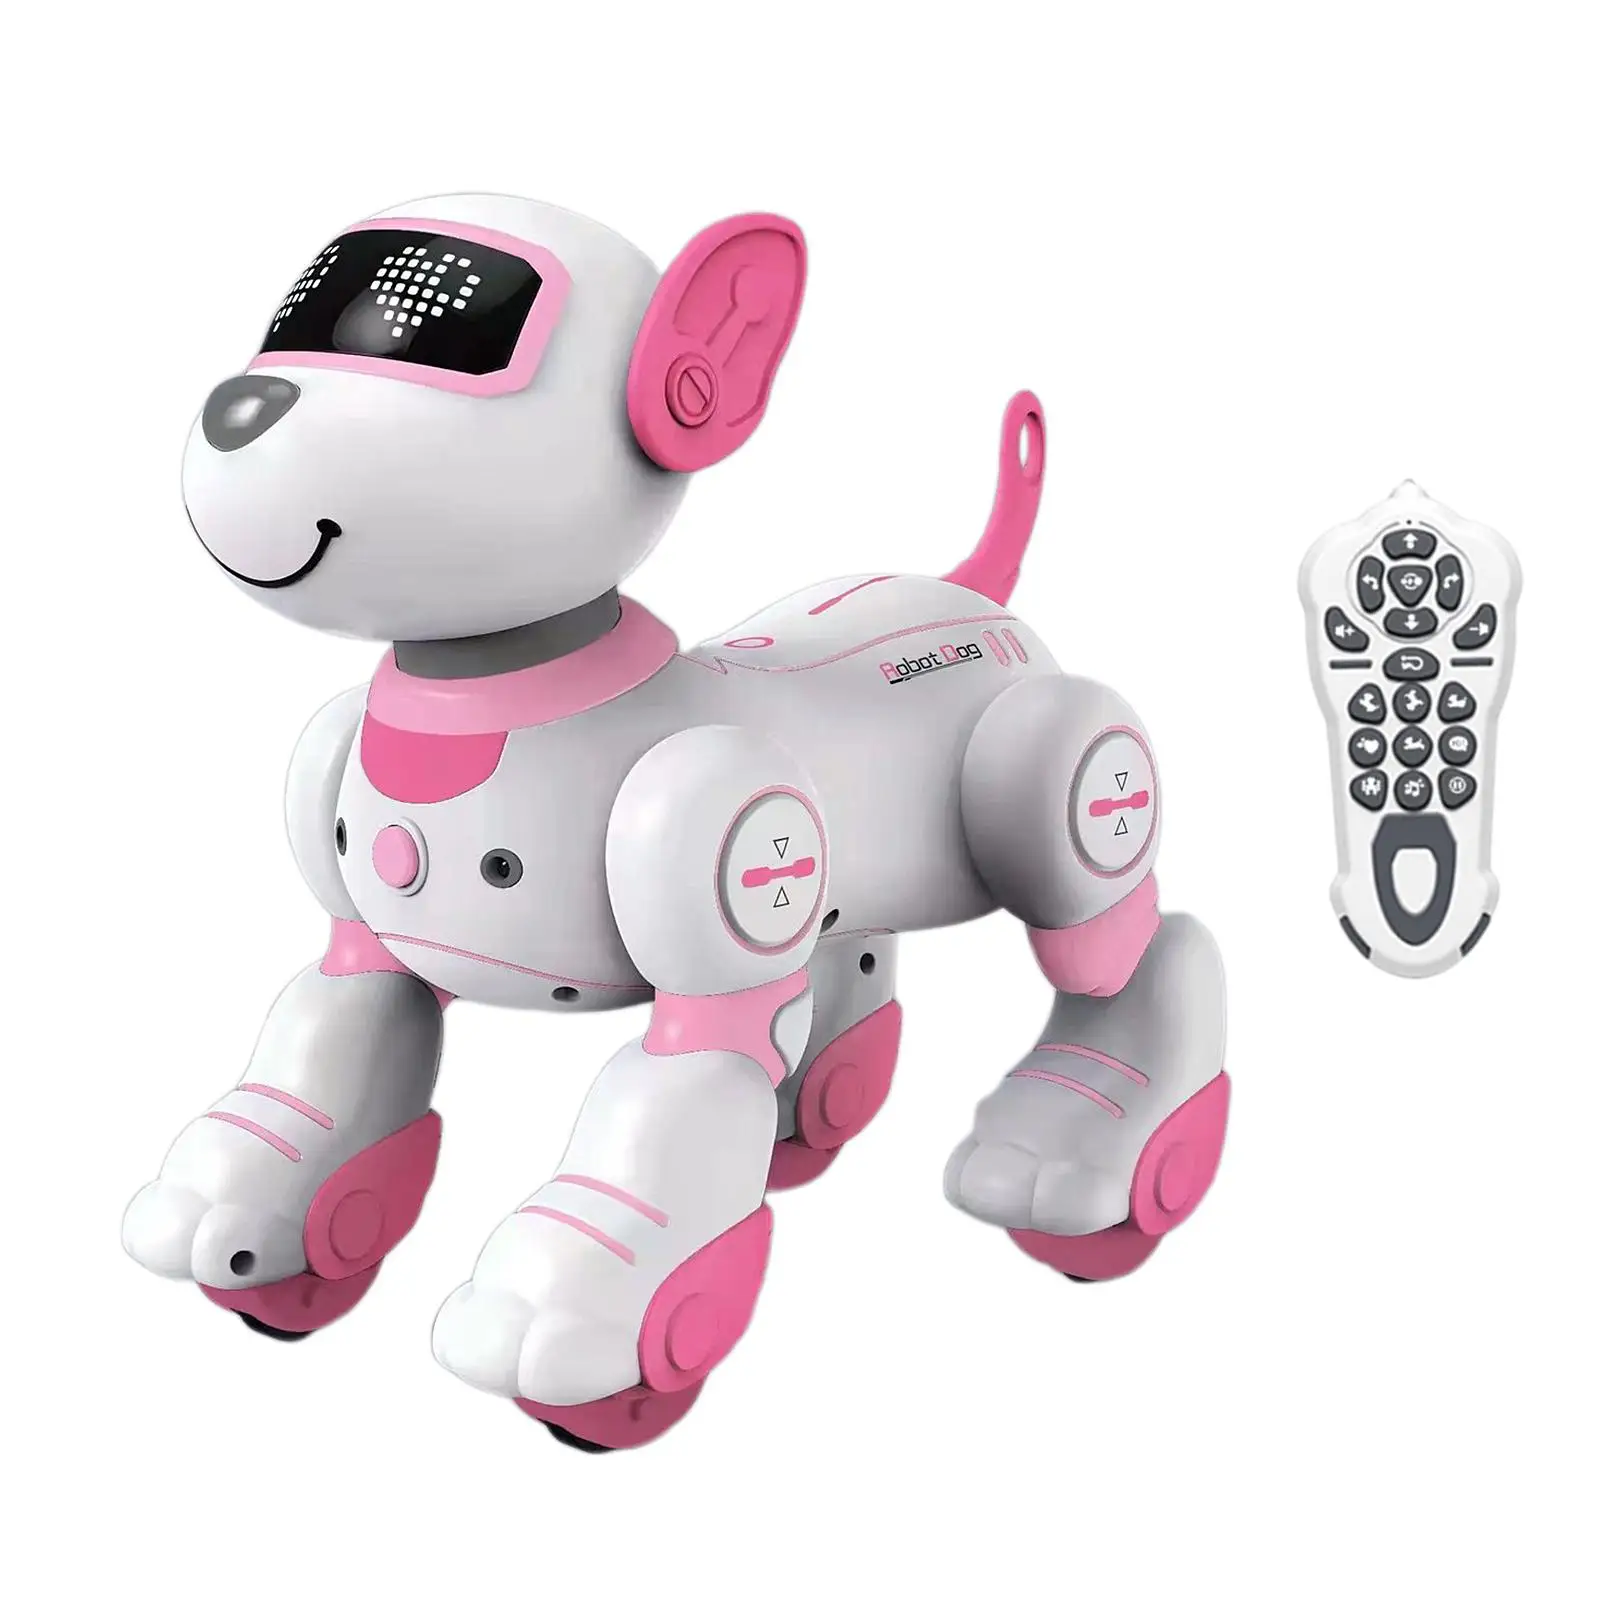 Robot Dog Toy Toys Remote Control Electronic Toys Robotic Pet Toy for Children`s All Ages Boys and Girls Boys Girls Baby